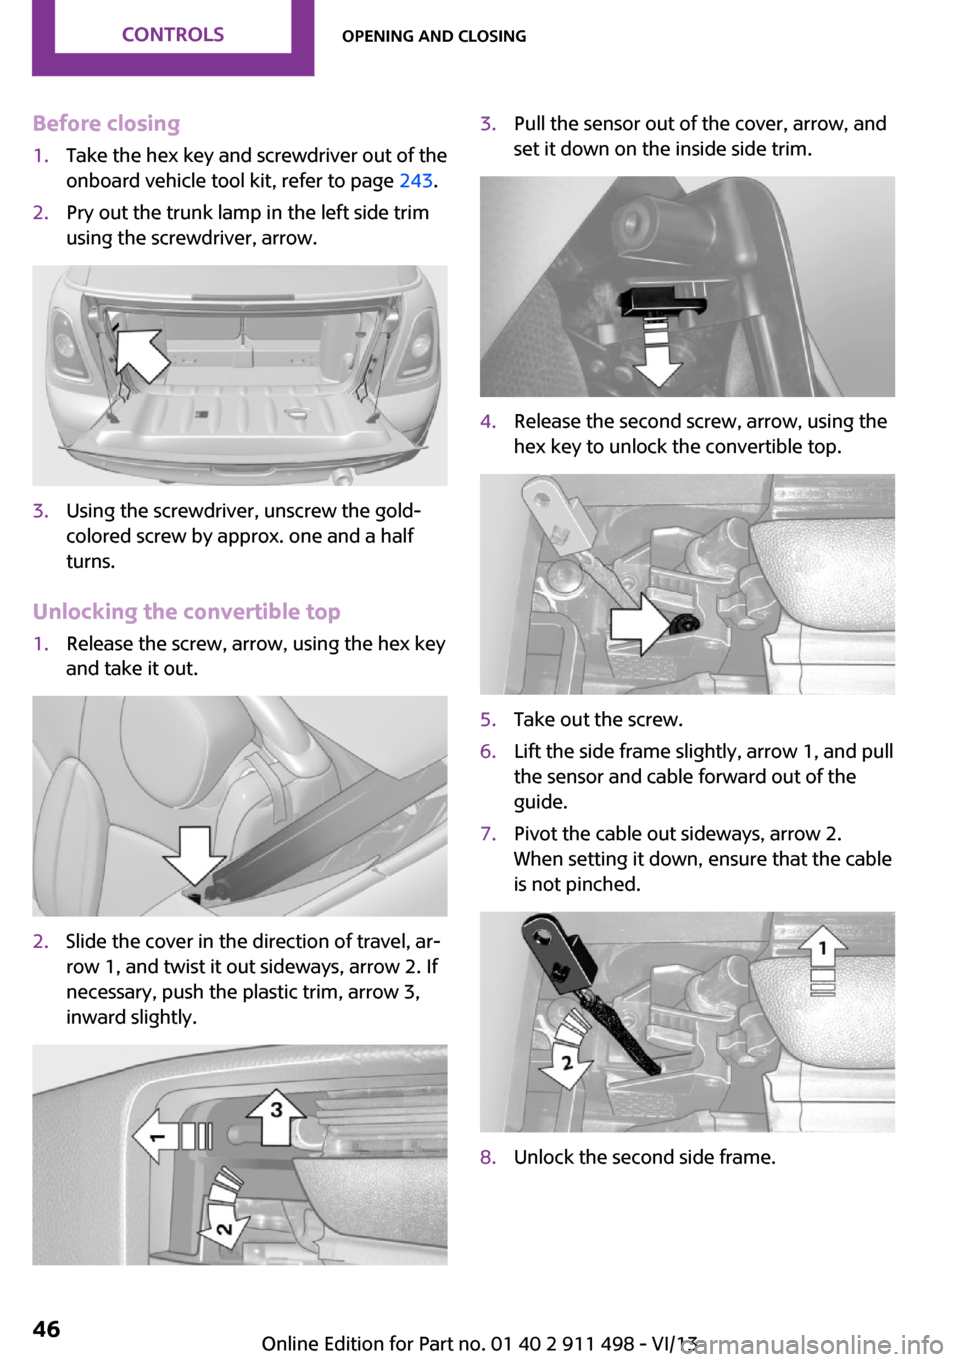 MINI Roadster 2014   (Mini Connected) Service Manual Before closing1.Take the hex key and screwdriver out of the
onboard vehicle tool kit, refer to page  243.2.Pry out the trunk lamp in the left side trim
using the screwdriver, arrow.3.Using the screwdr